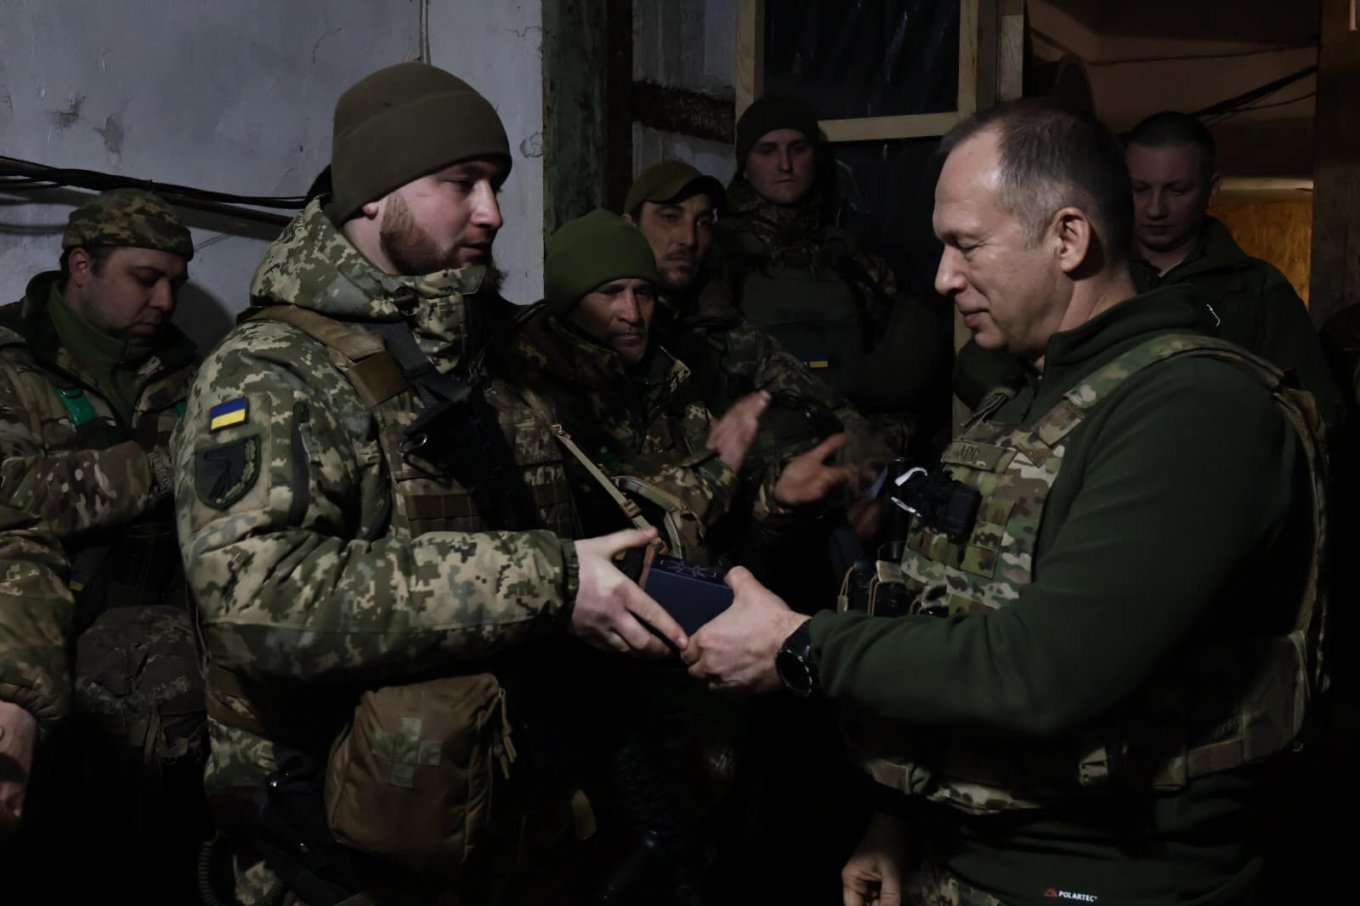 Ukrainian Ground Forces' Commander Colonel-General Oleksandr Syrskyi says the real heroes now are the defenders who hold the eastern front on their shoulders, Defense Express